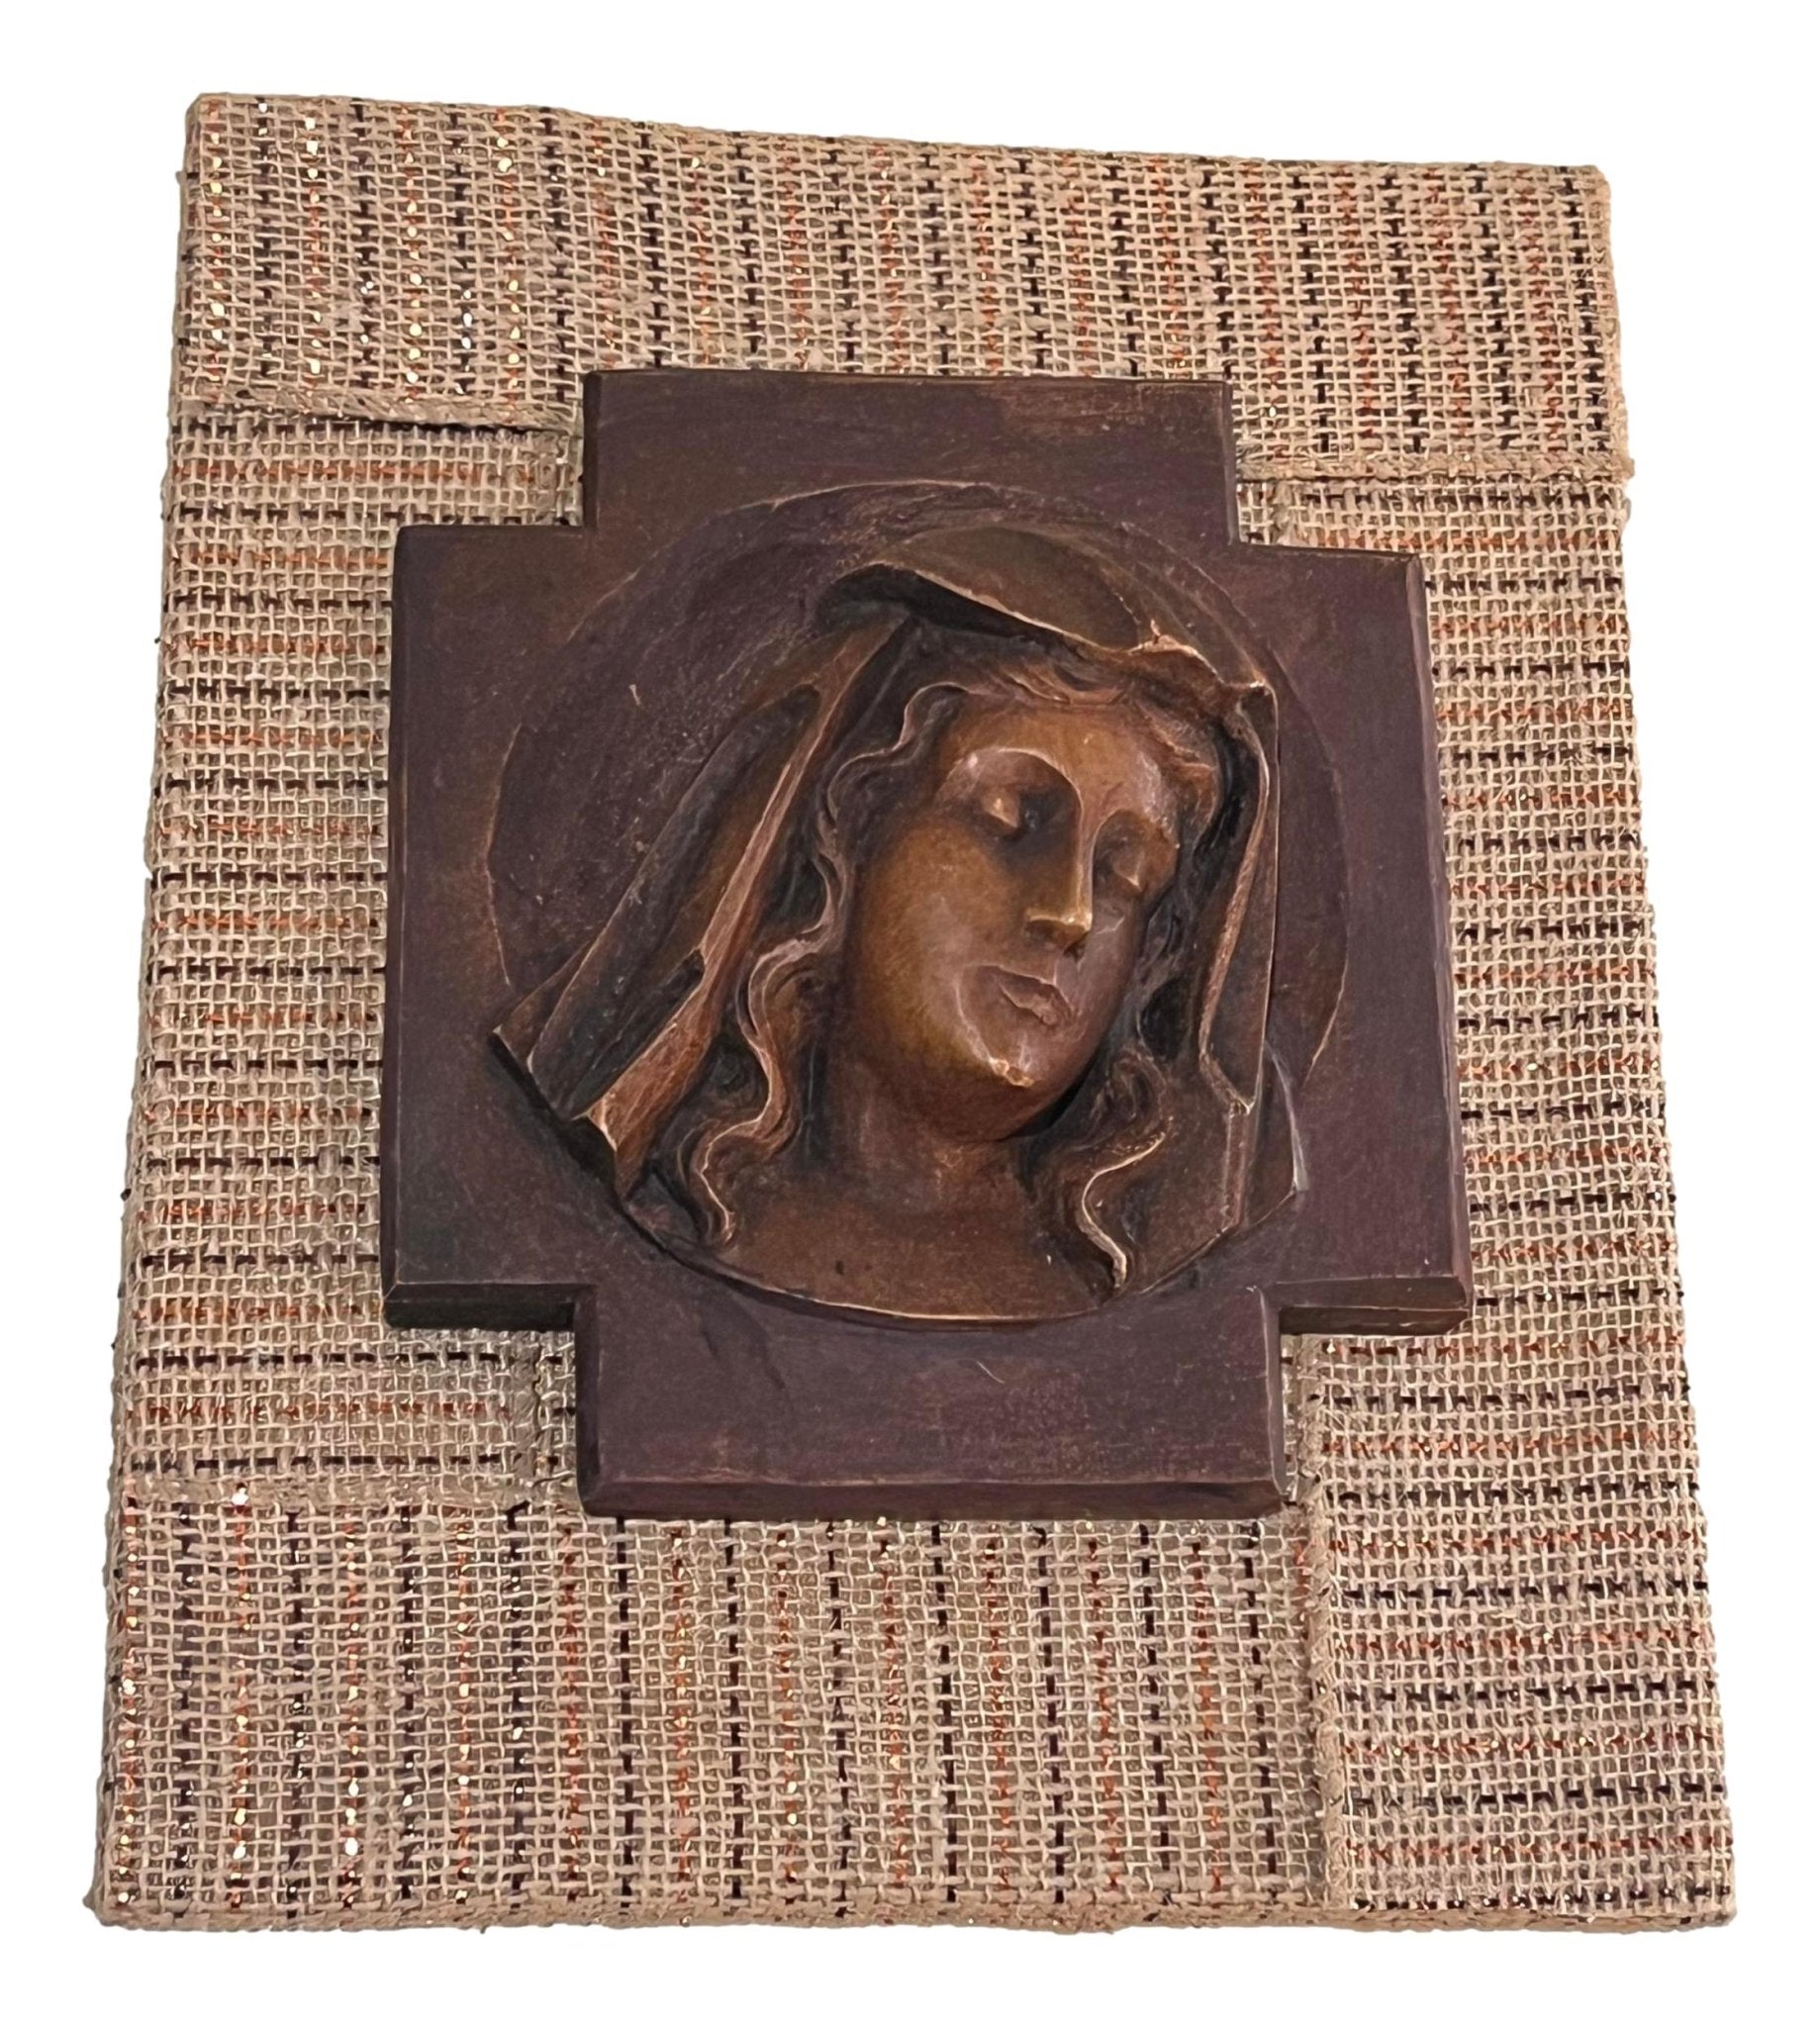 Art Virgen On Burlap Covered Wooden Plaque Handcrafted By Local Artisans L: 10 inches X W: 8 inches - Ysleta Mission Gift Shop- VOTED 2022 El Paso's Best Gift Shop